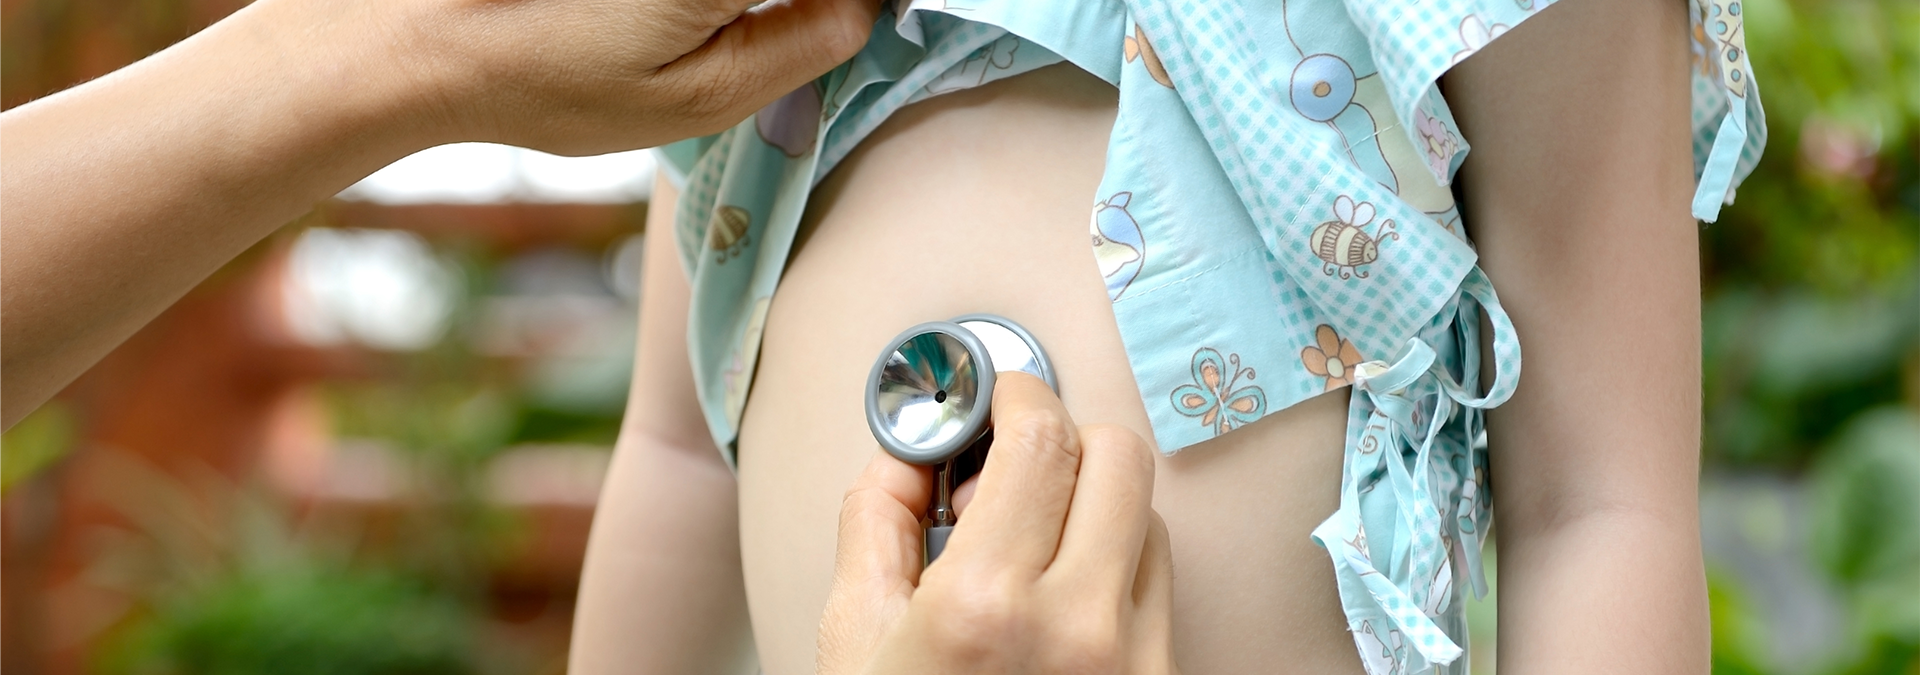 Provider with stethoscope on young child's stomach